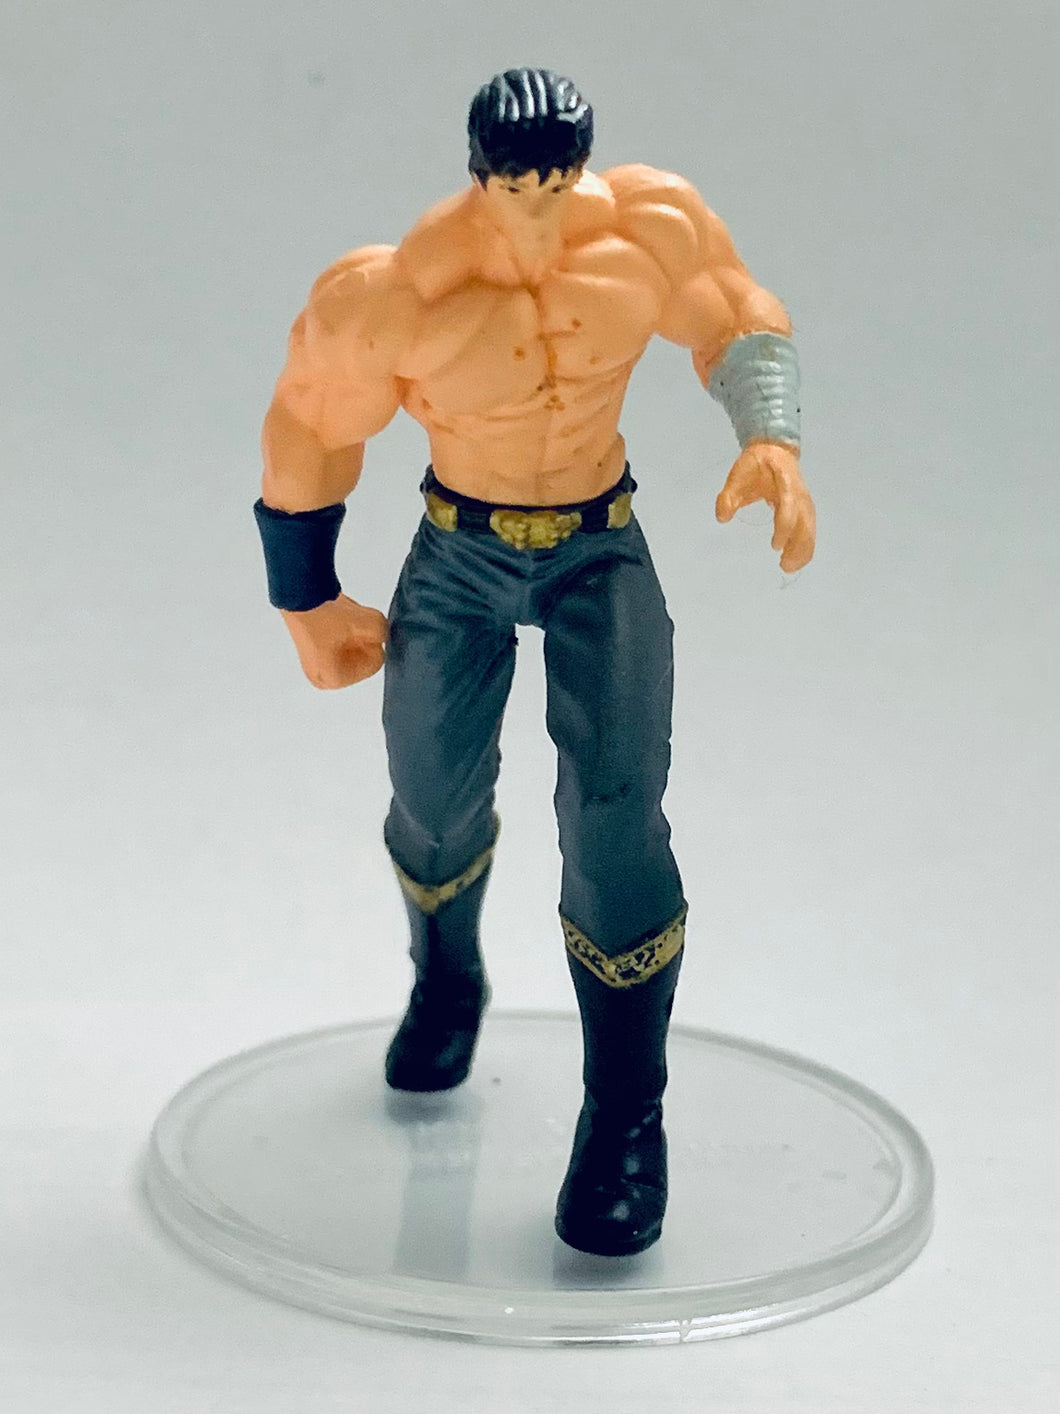 Hokuto no Ken - Kenshirou - Fist of the North Star All-Star Retsuden Capsule Figure Collection Part 2 - Repaint ver. (Gray Pants)